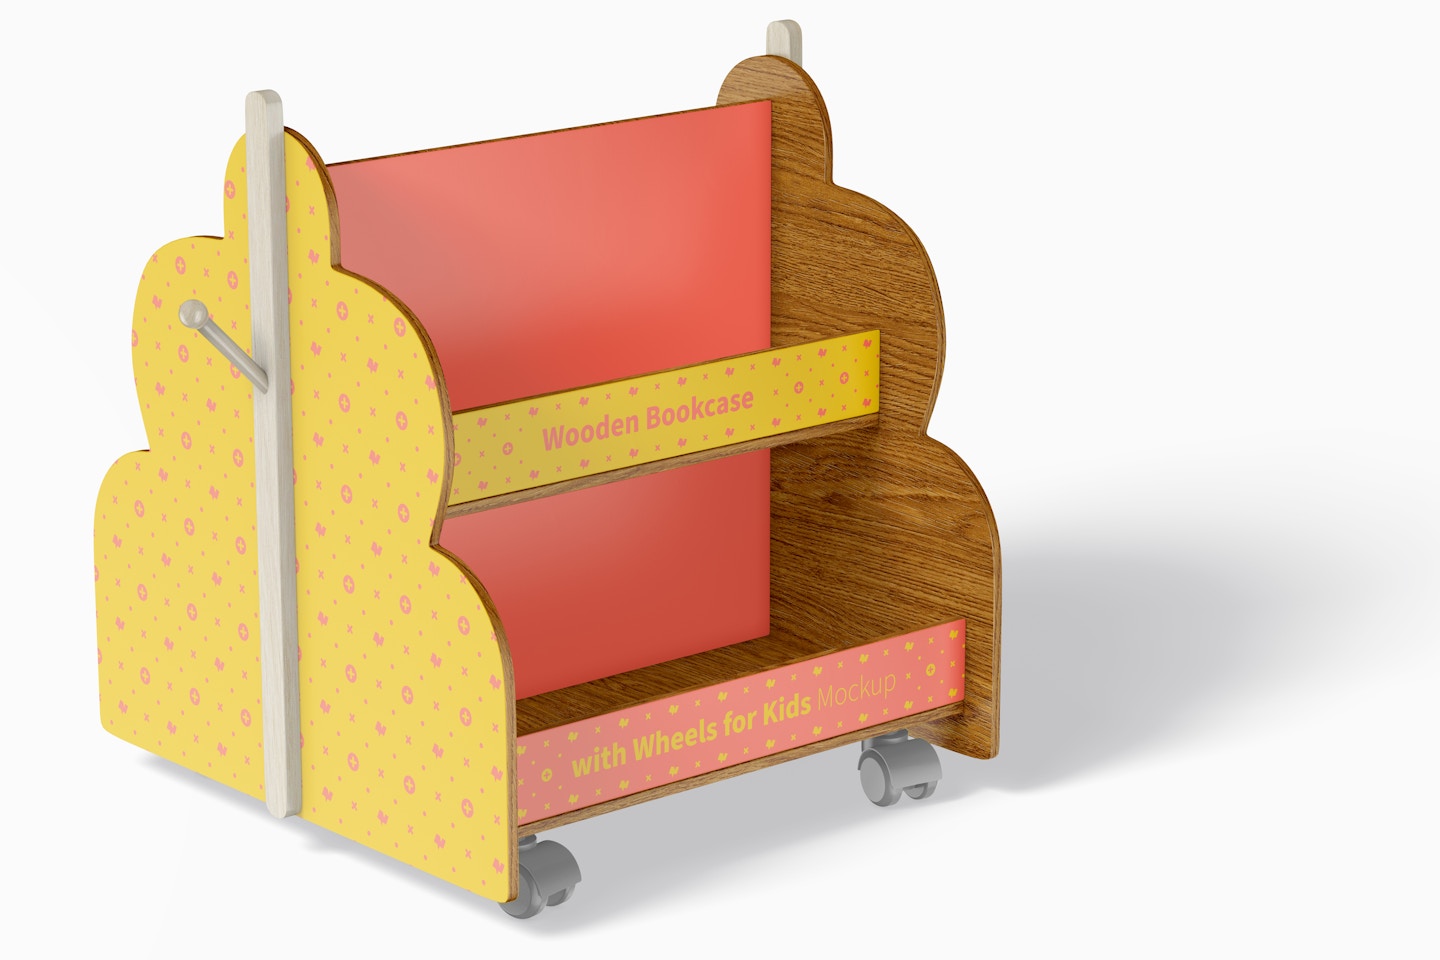 Wooden Bookcase with Wheels for Kids Mockup